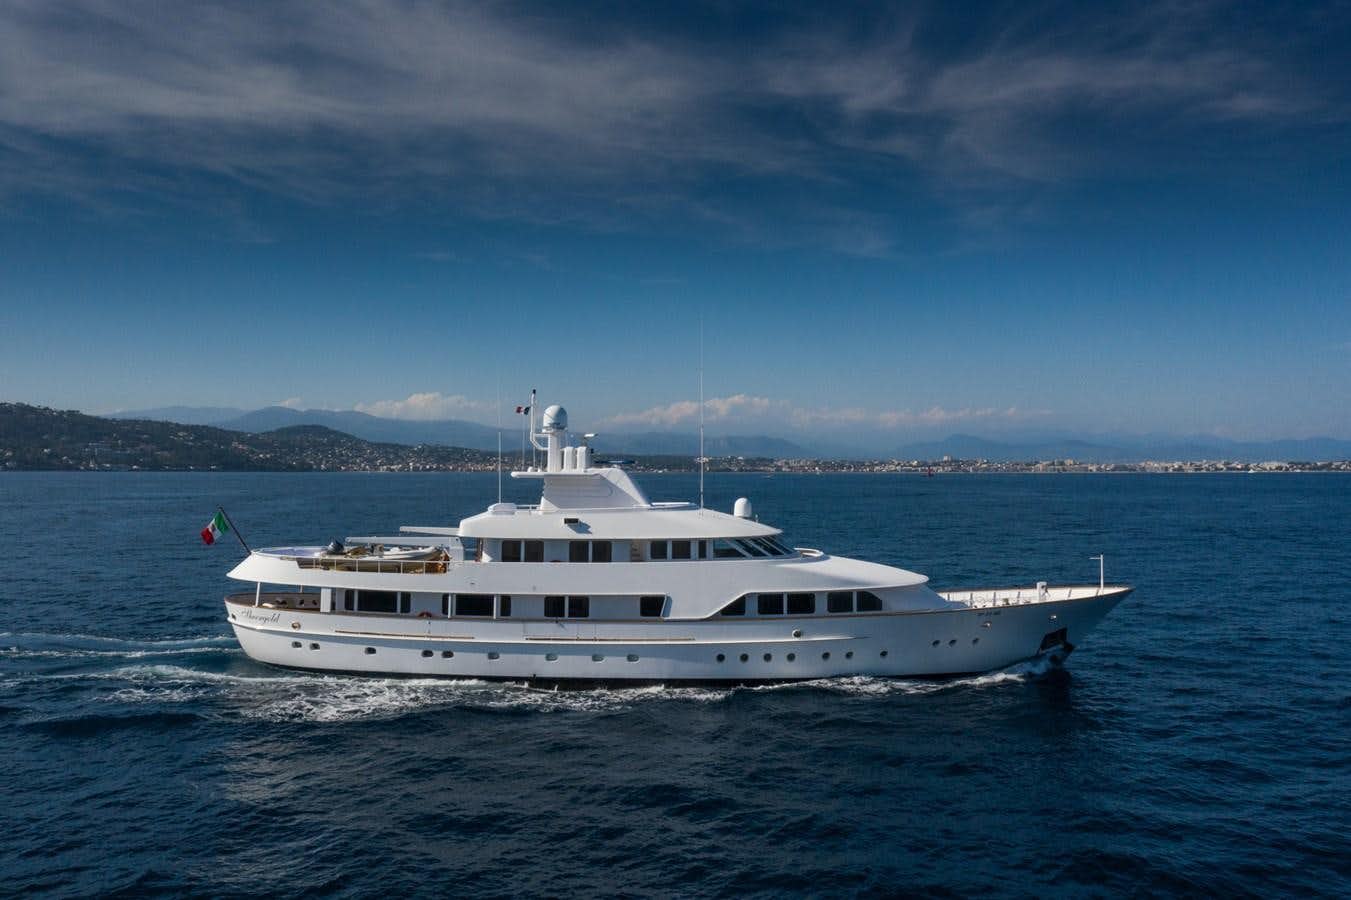 Sheergold
Yacht for Sale